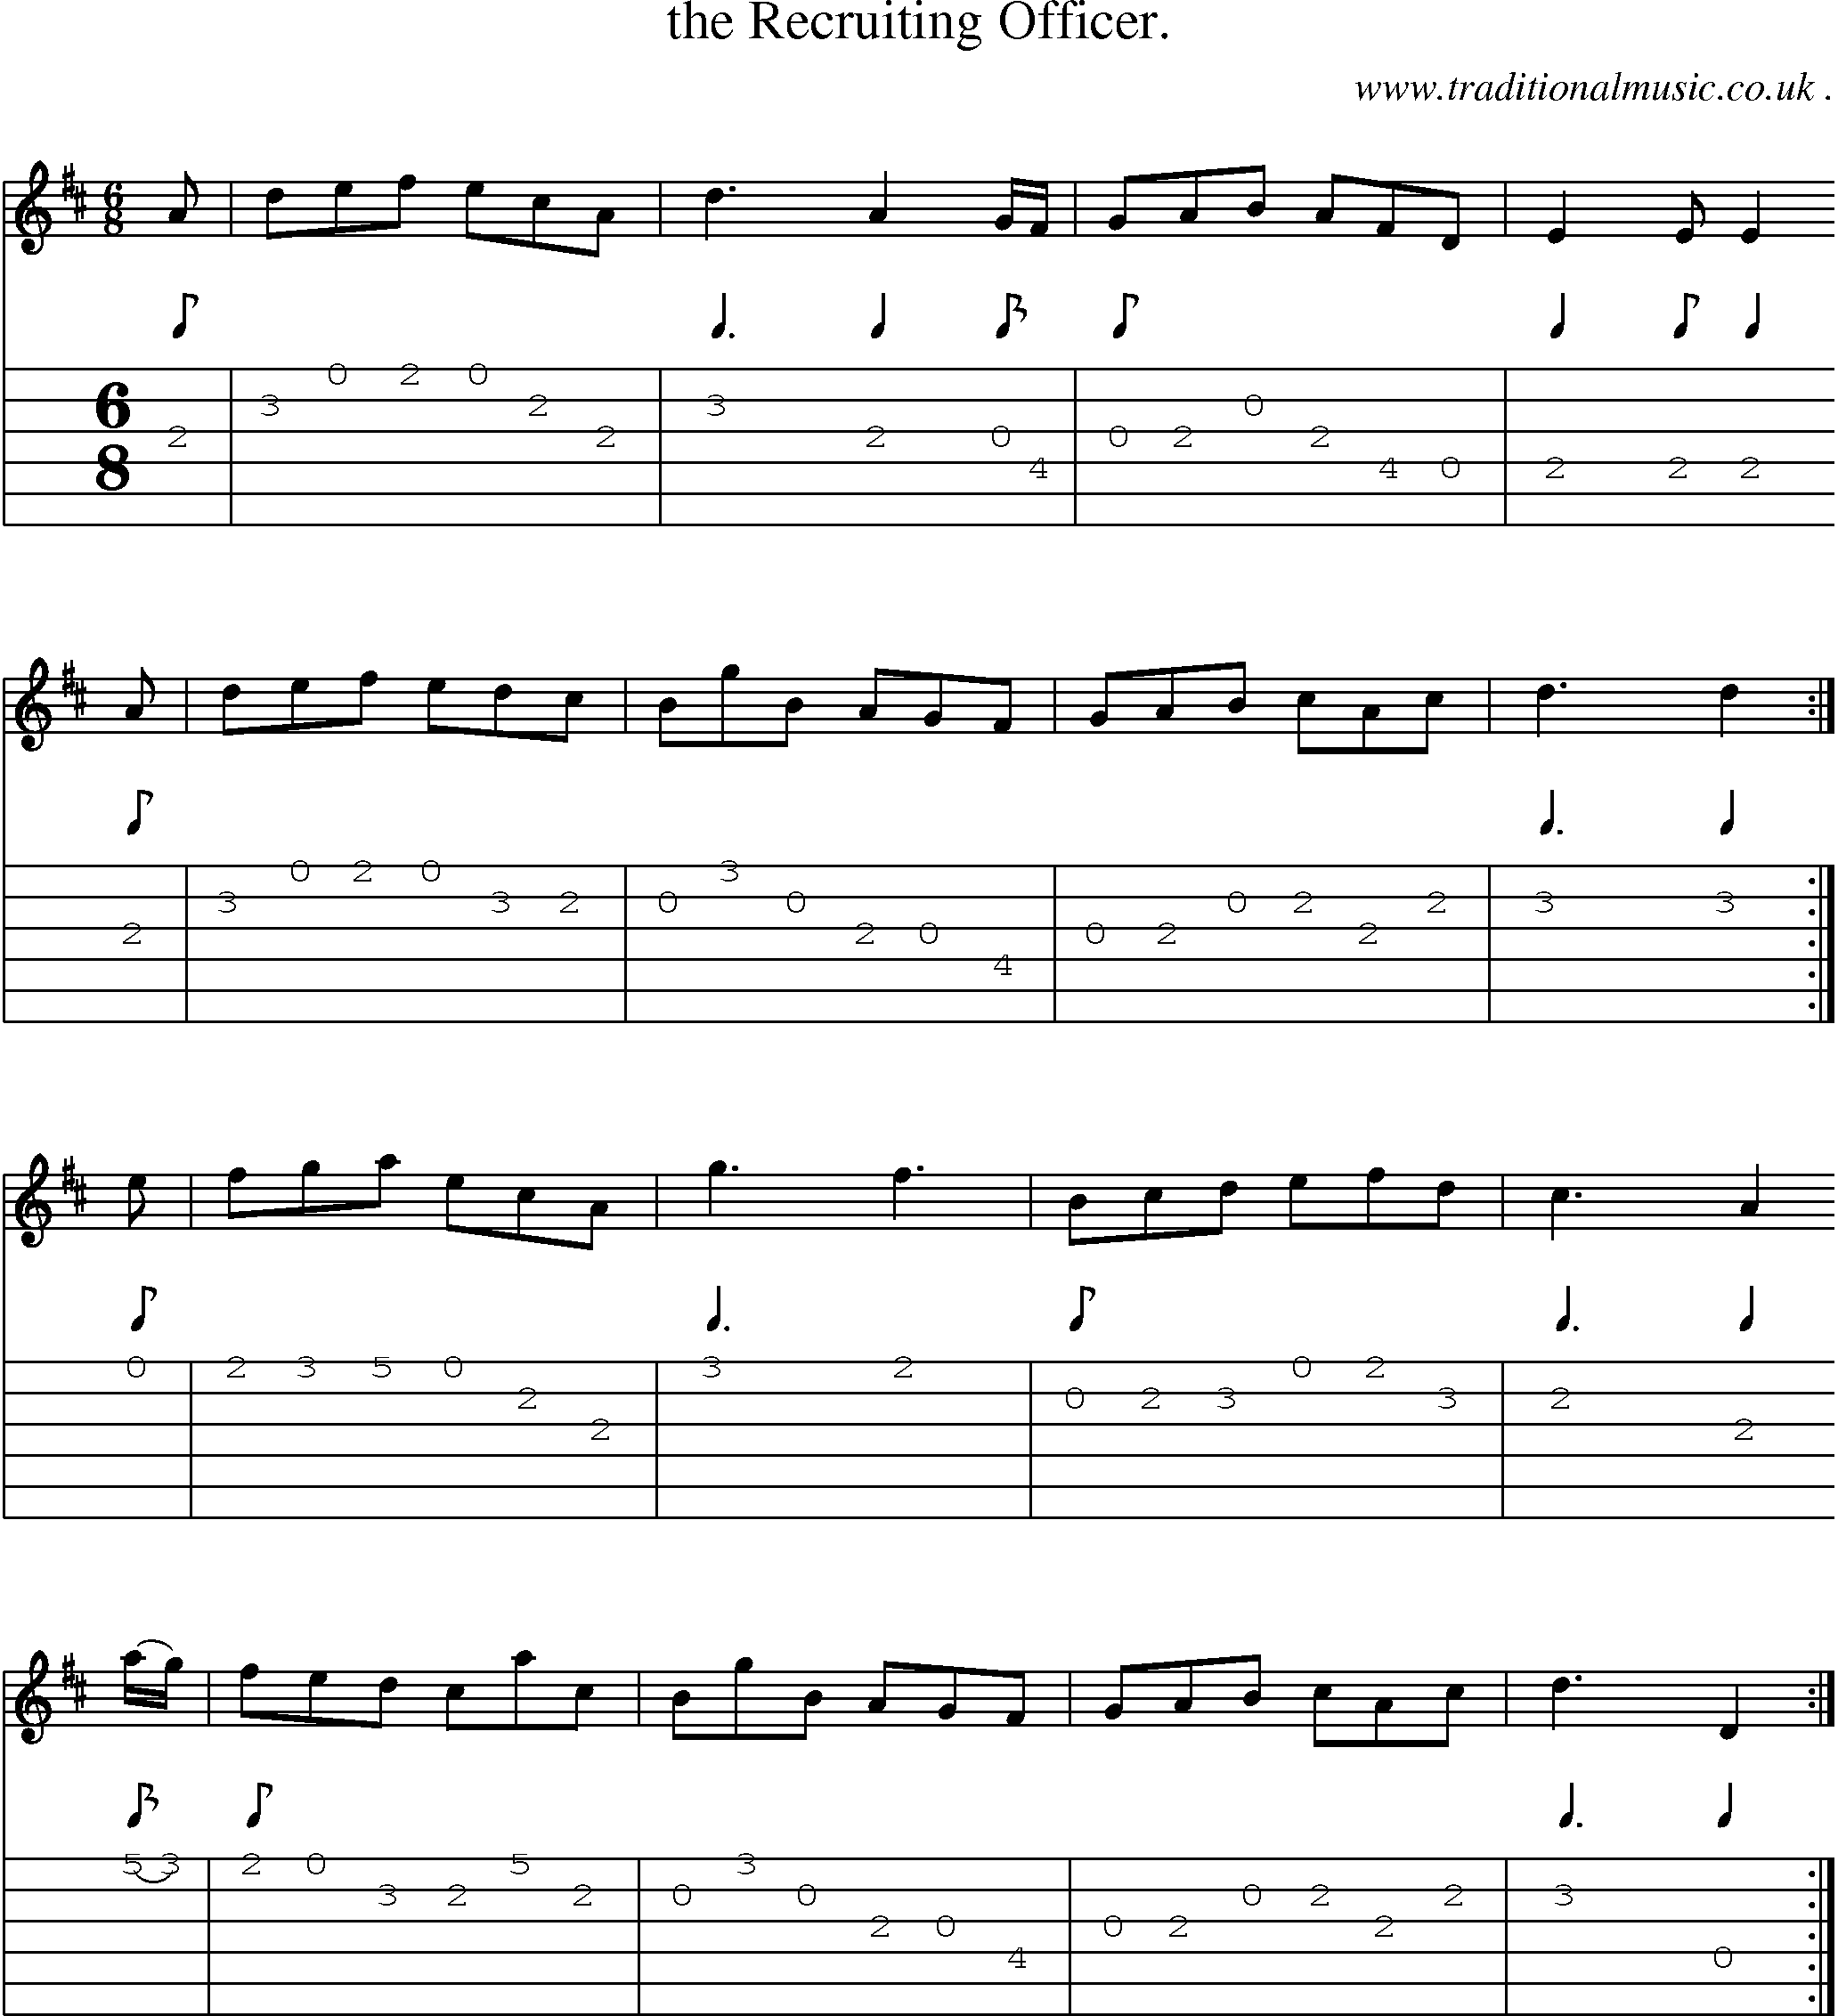 Sheet-Music and Guitar Tabs for The Recruiting Officer